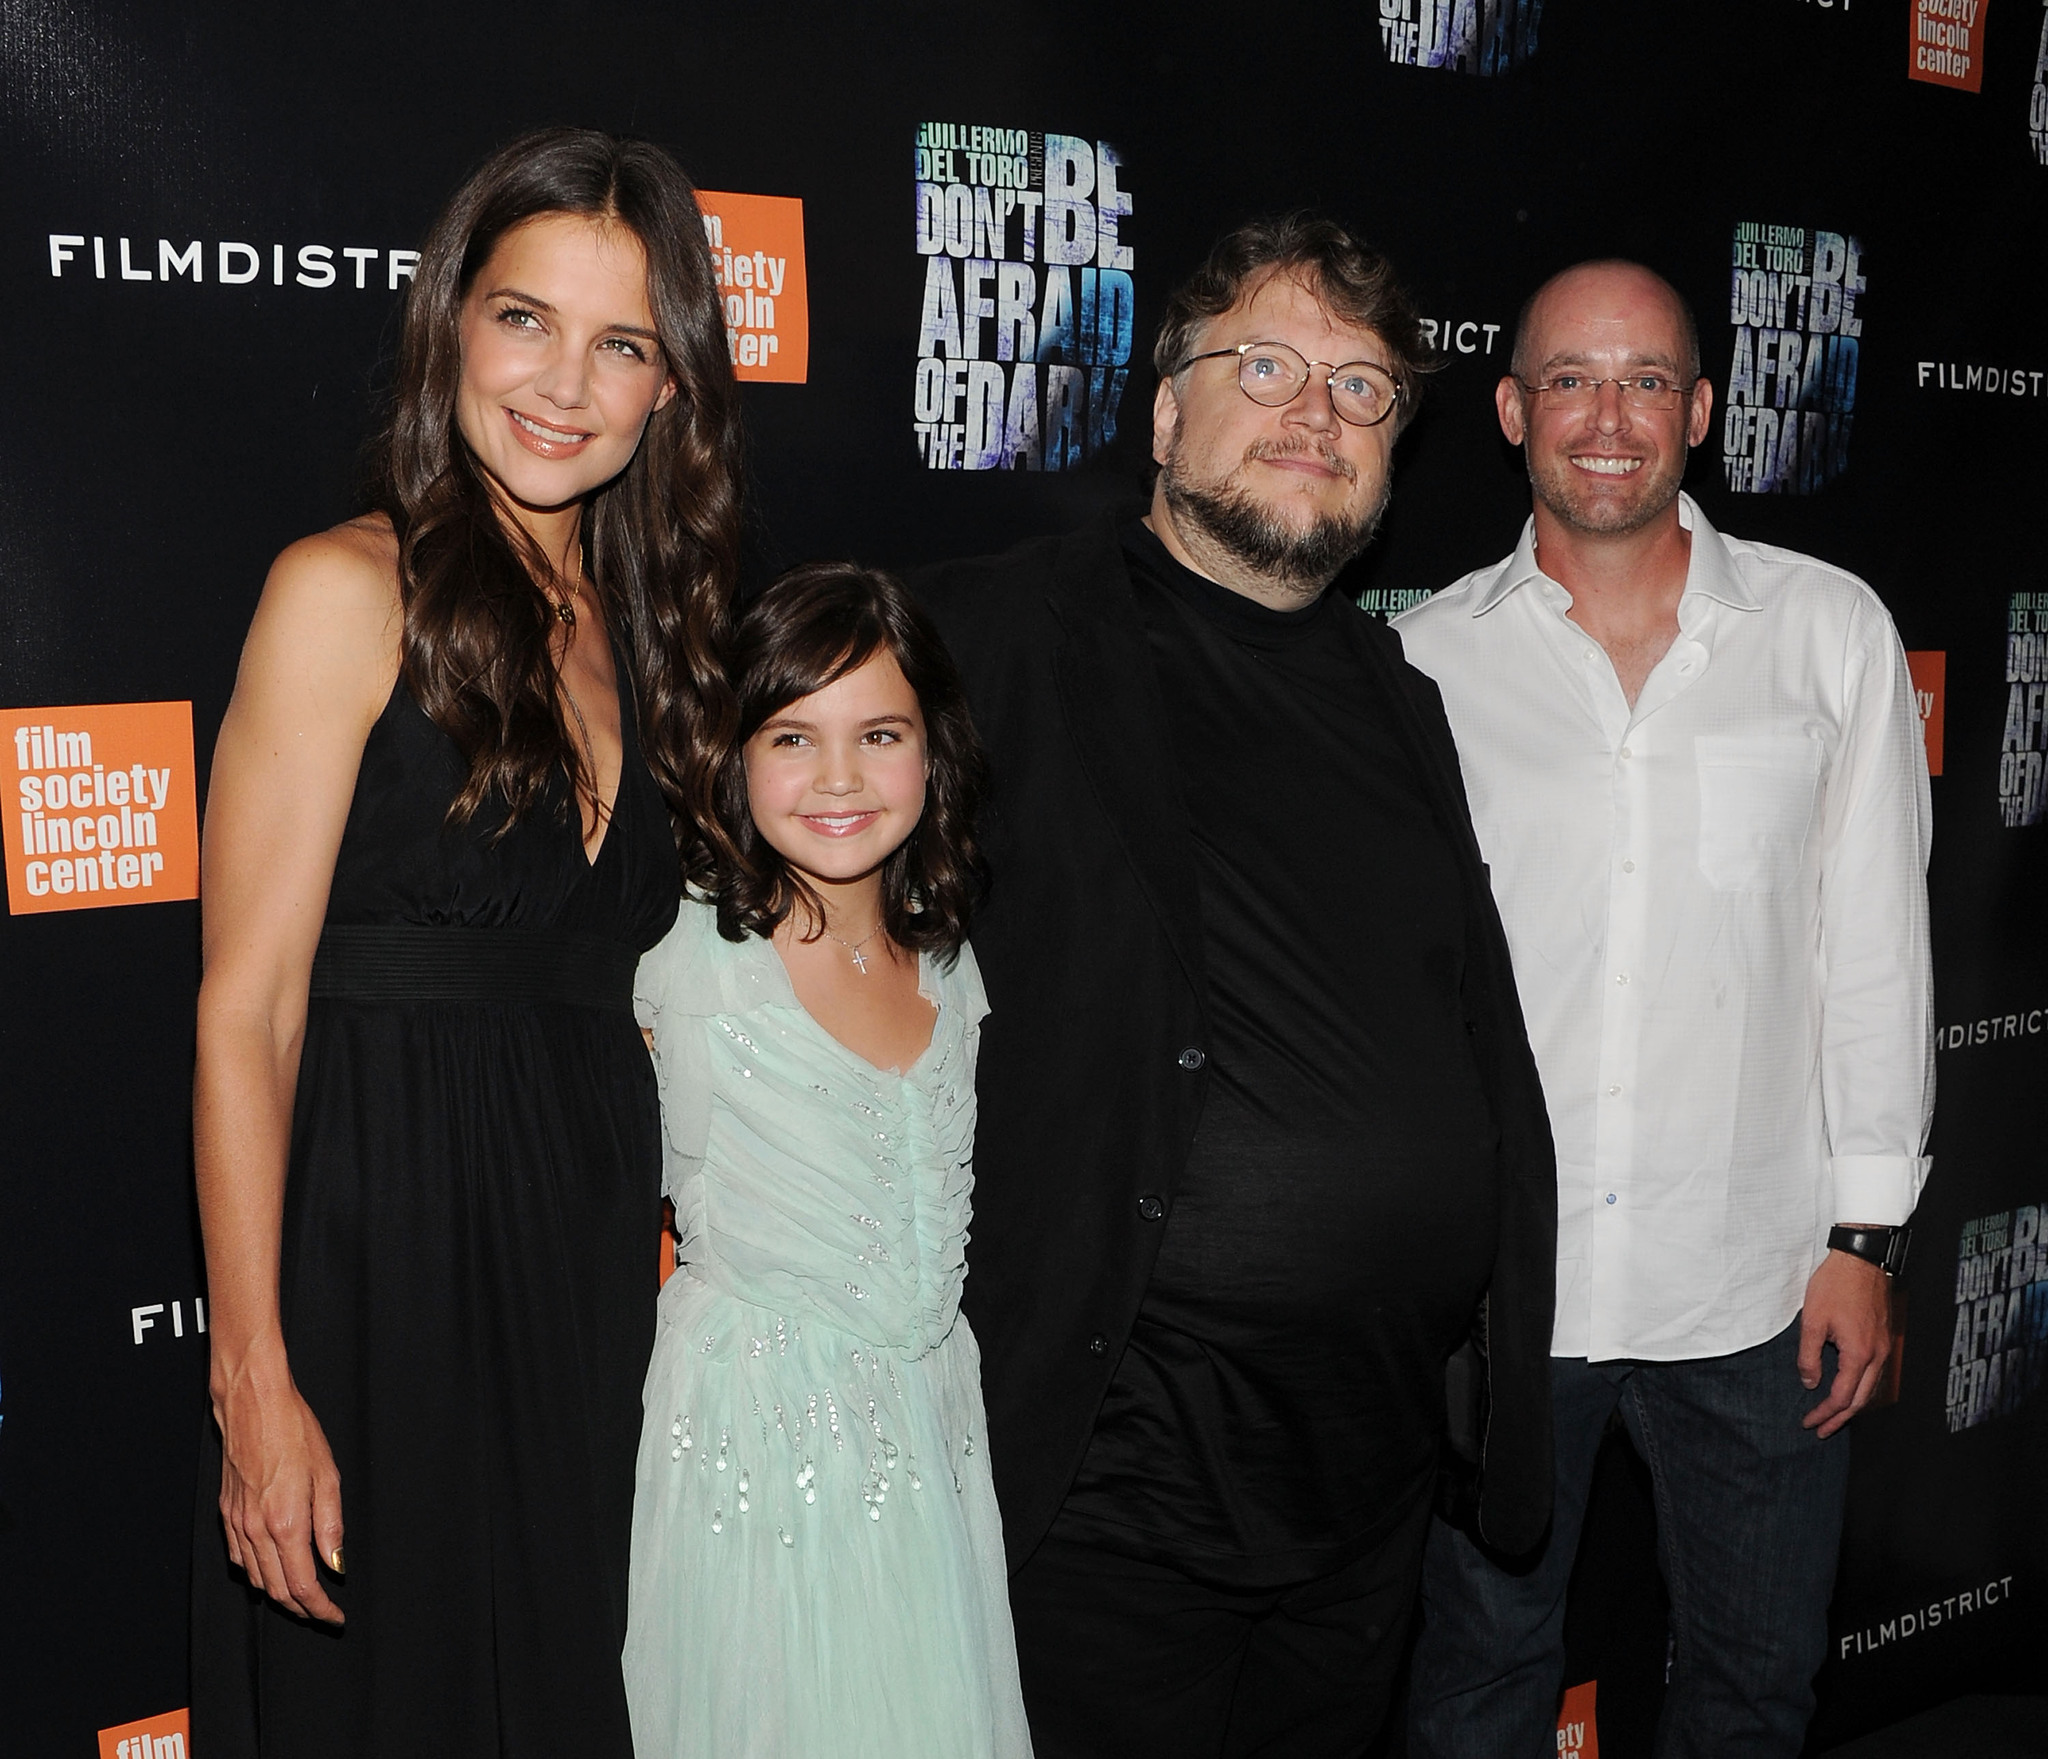 Katie Holmes, Guillermo del Toro, Bailee Madison and Troy Nixey at event of Nebijok tamsos (2010)